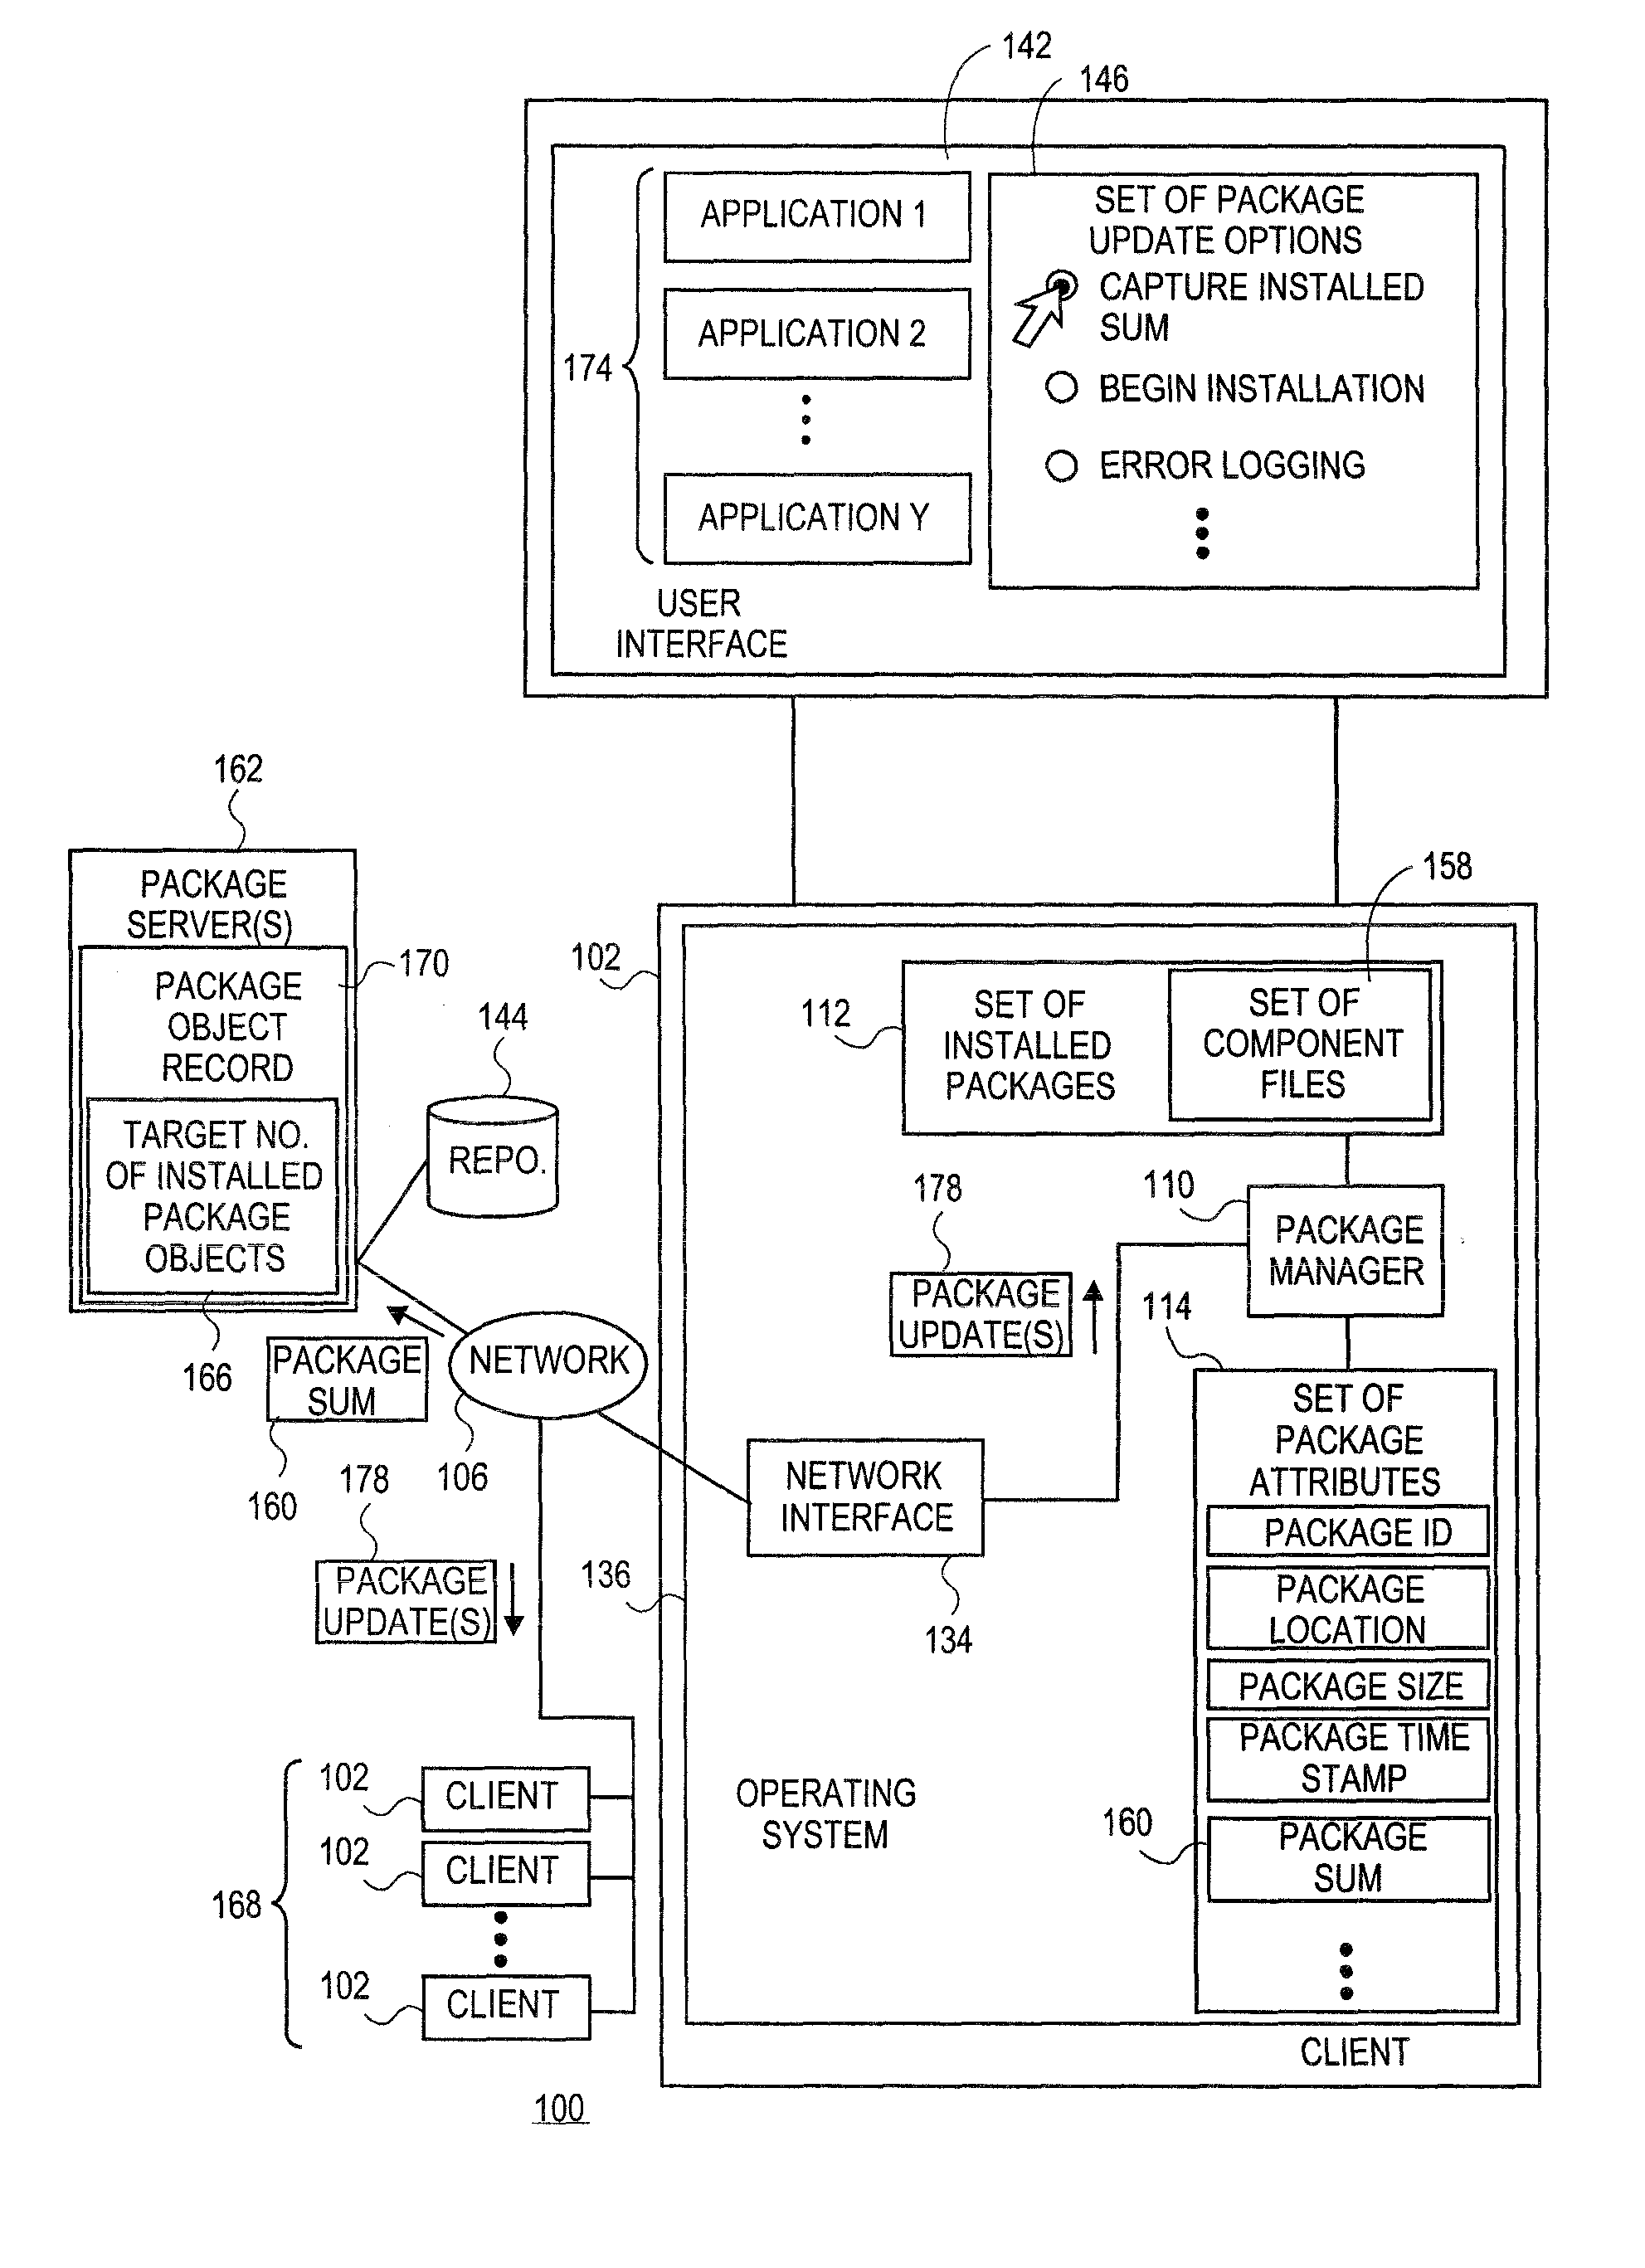 Systems and methods for generating machine state verification using number of installed package objects